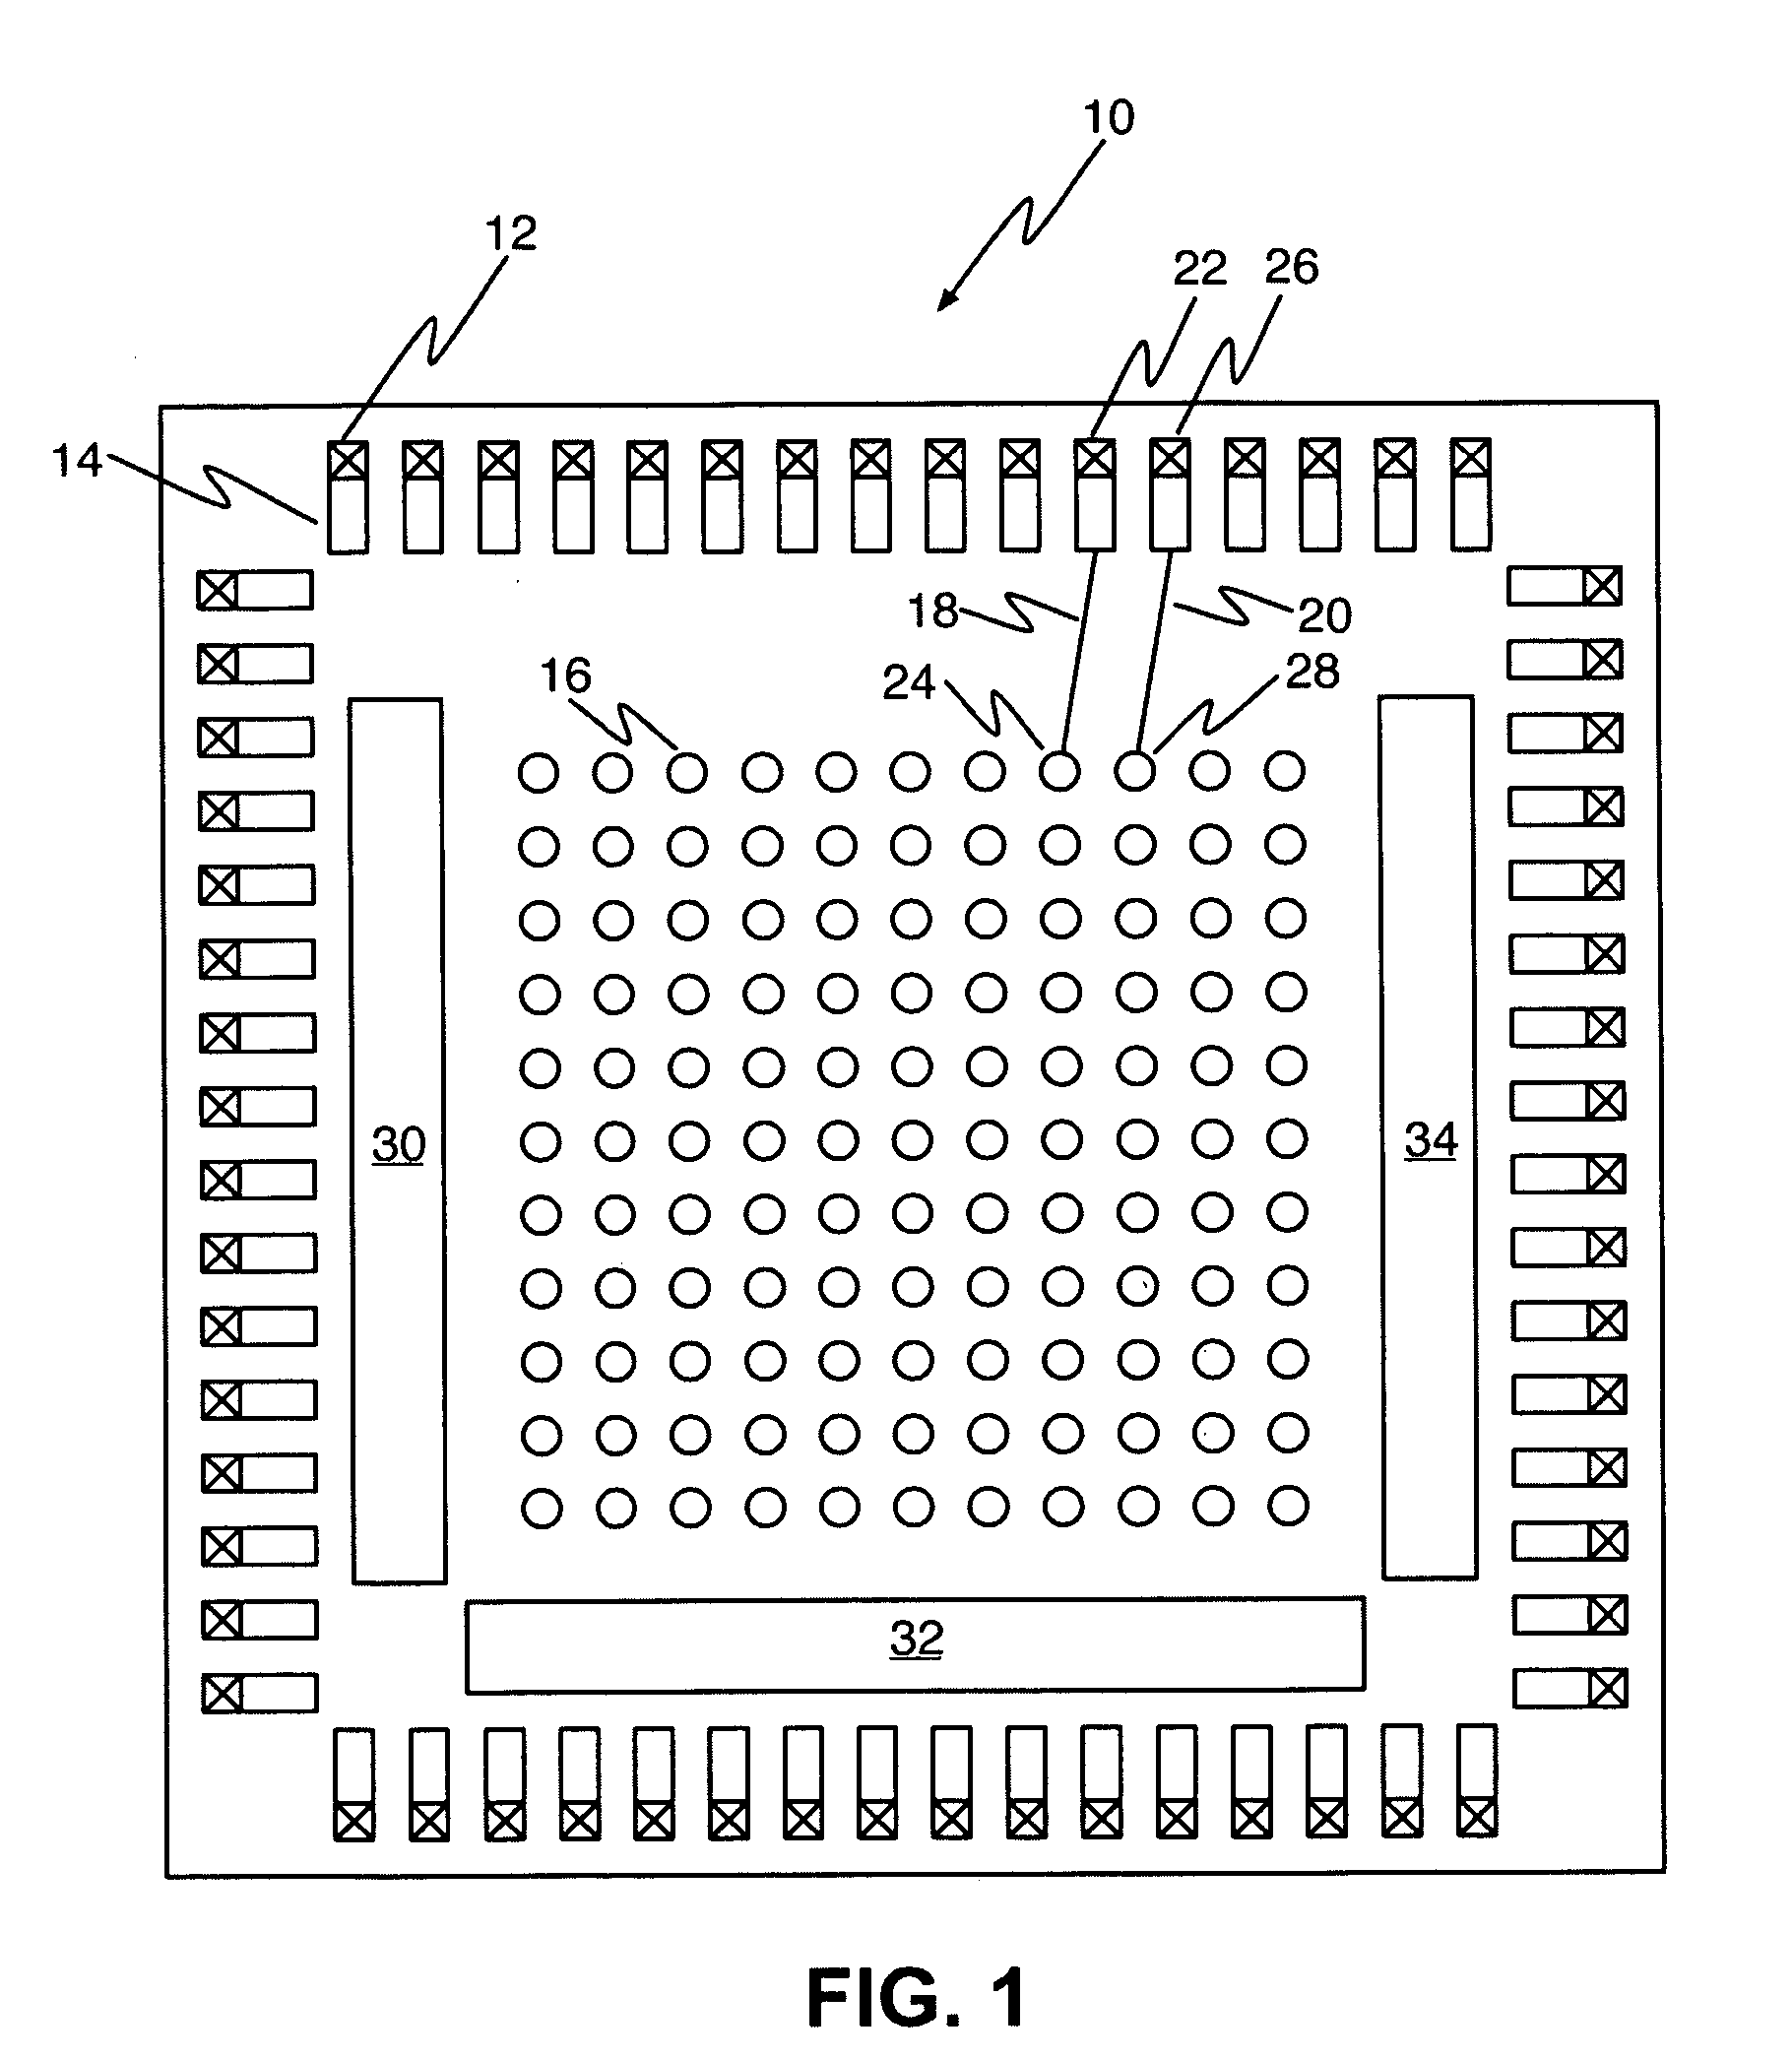 Face-to-face bonded I/O circuit die and functional logic circuit die system